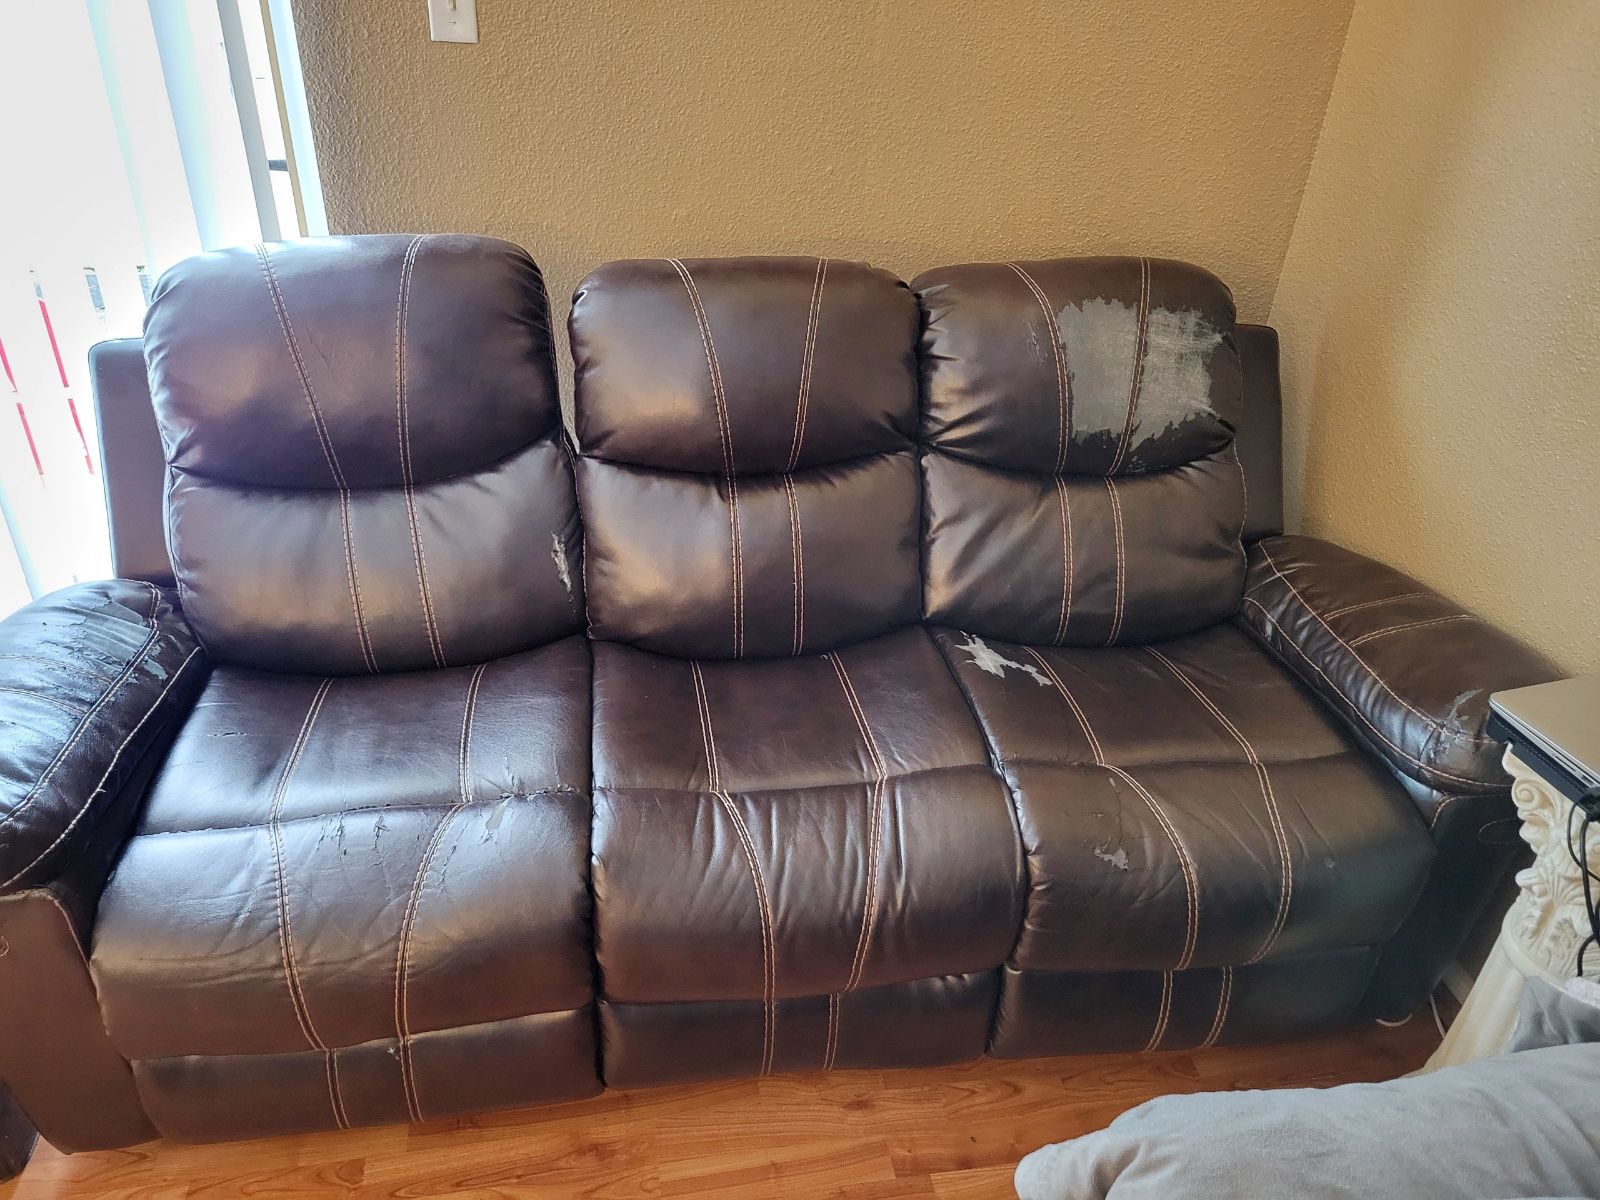 Recliner Couch & Recliner chair 